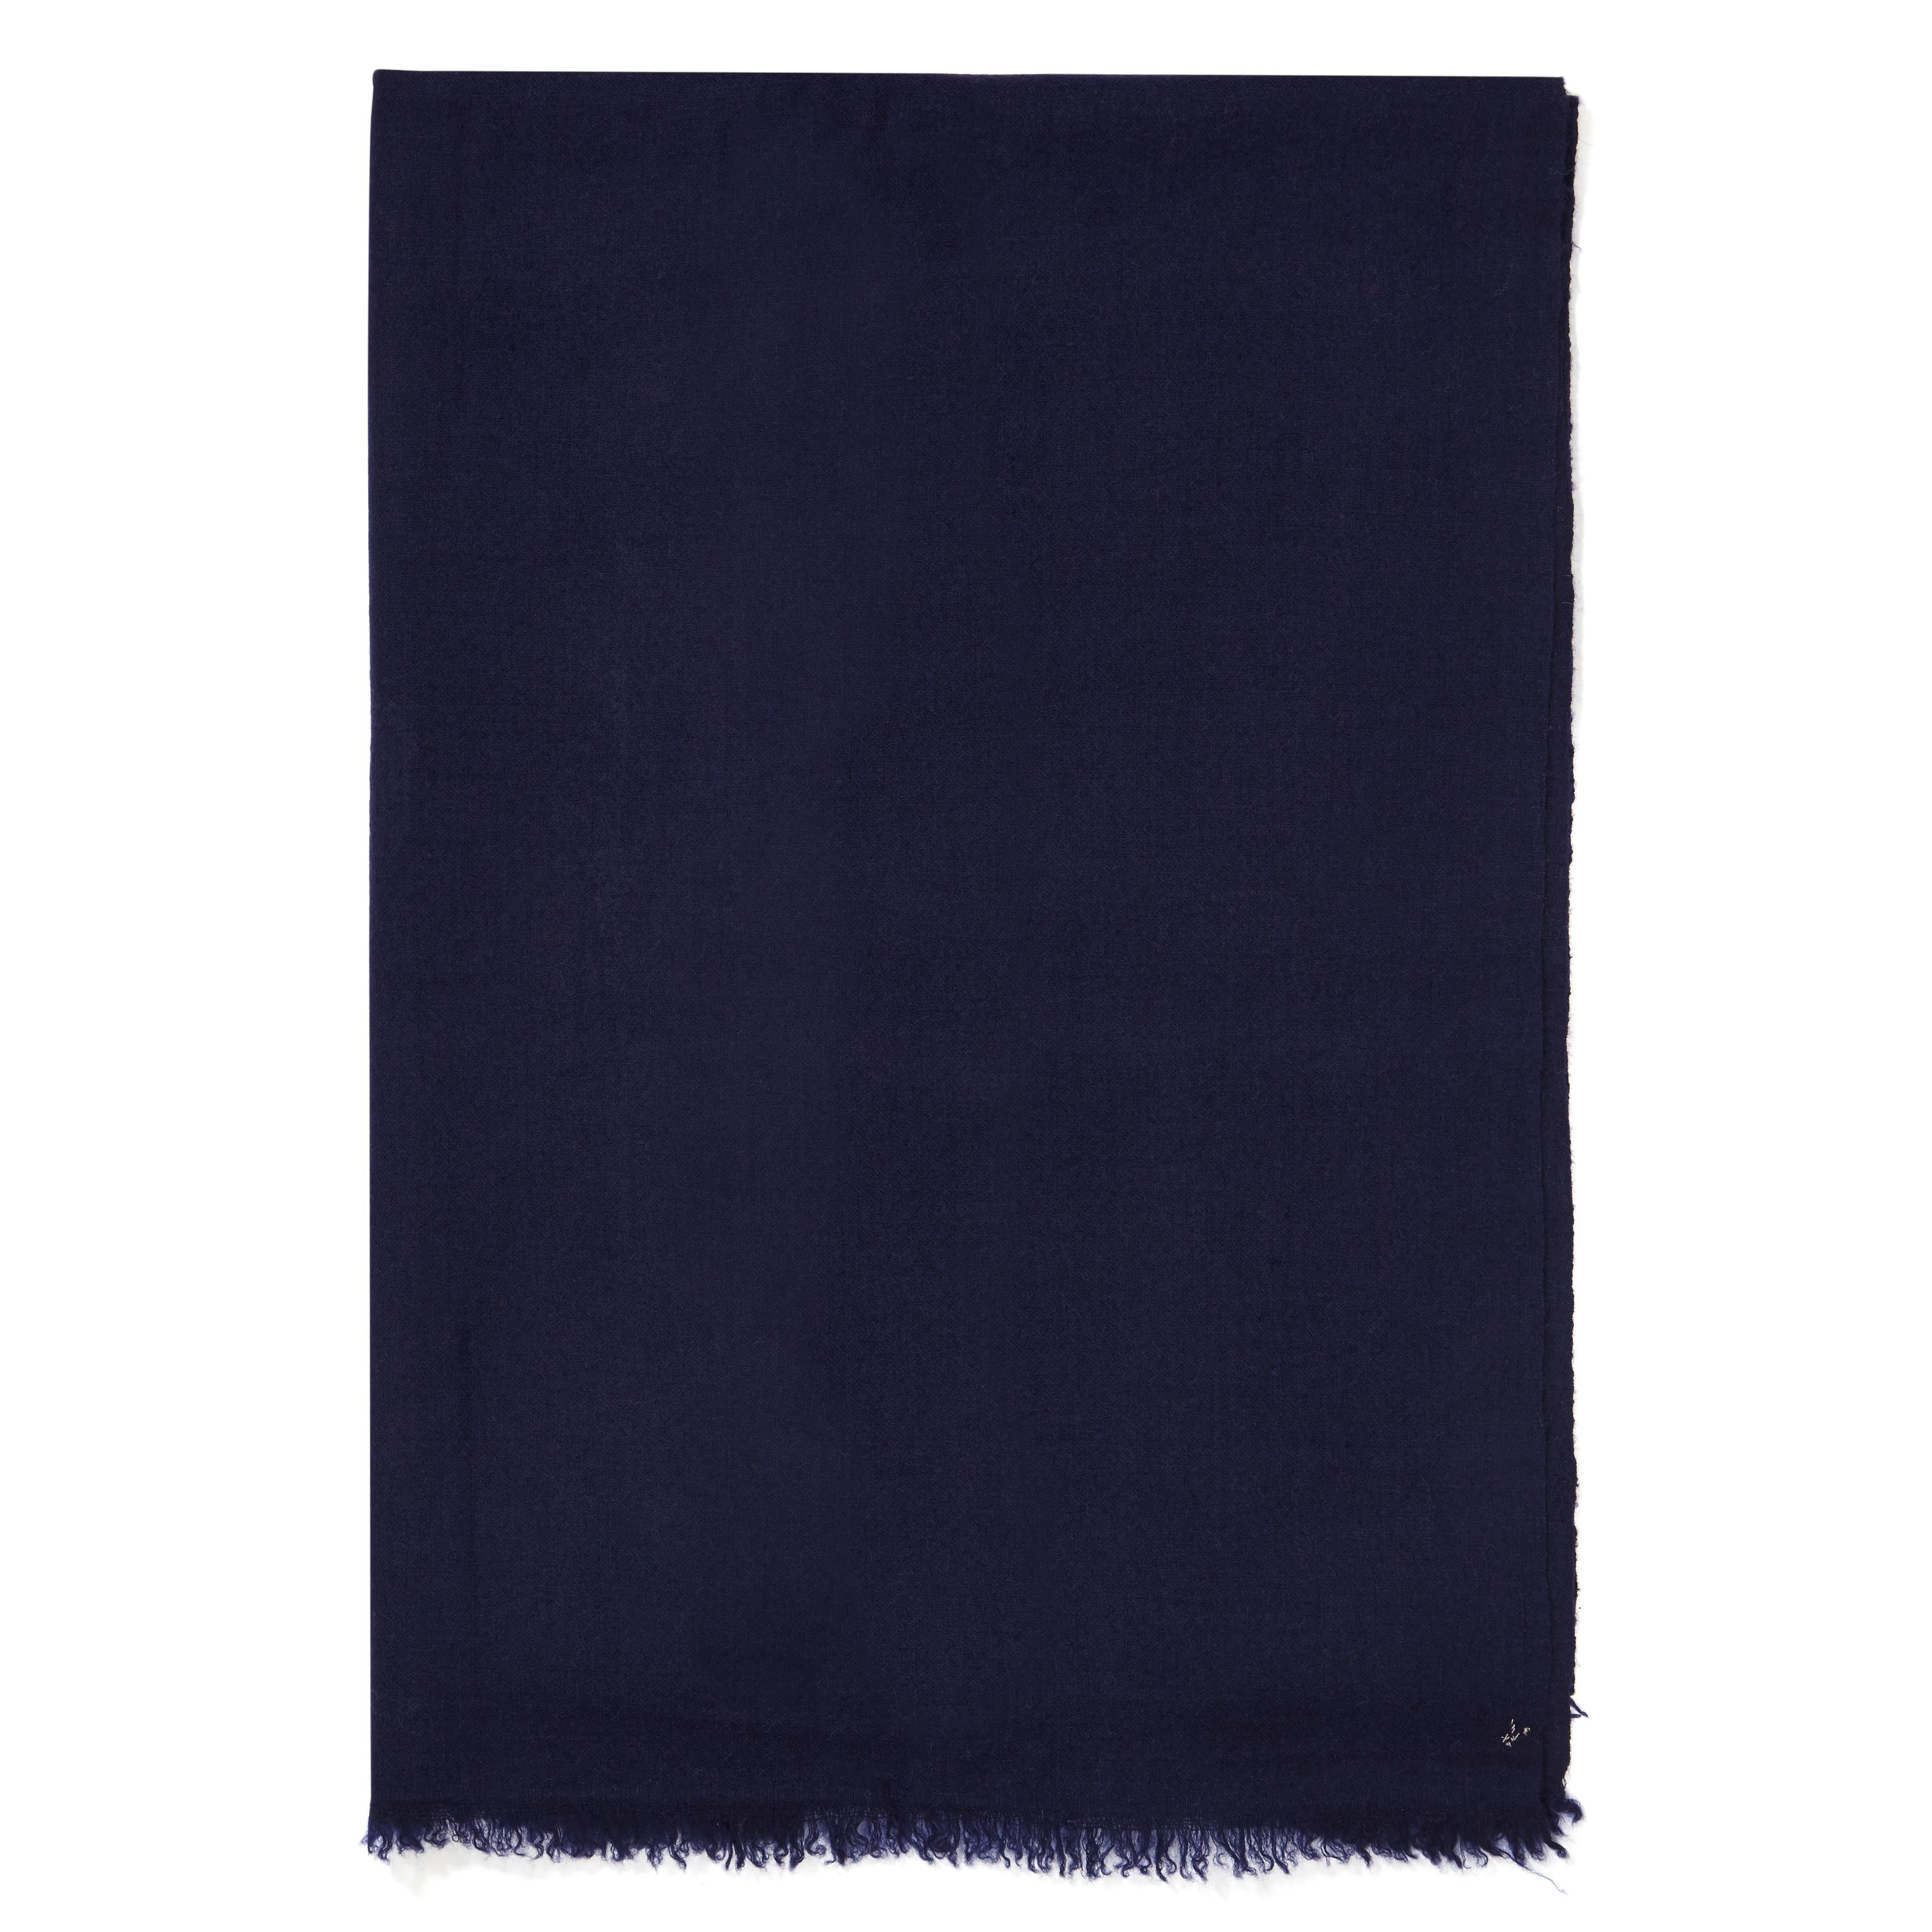 Large Handwoven 100% Cashmere Scarf in Navy made in Kashmir India - Brand New 

The perfect Christmas gift for someone special - this shawl is unique and handmade. 
Verheyen London’s shawl is spun from the finest handwoven cashmere from Kashmir. 